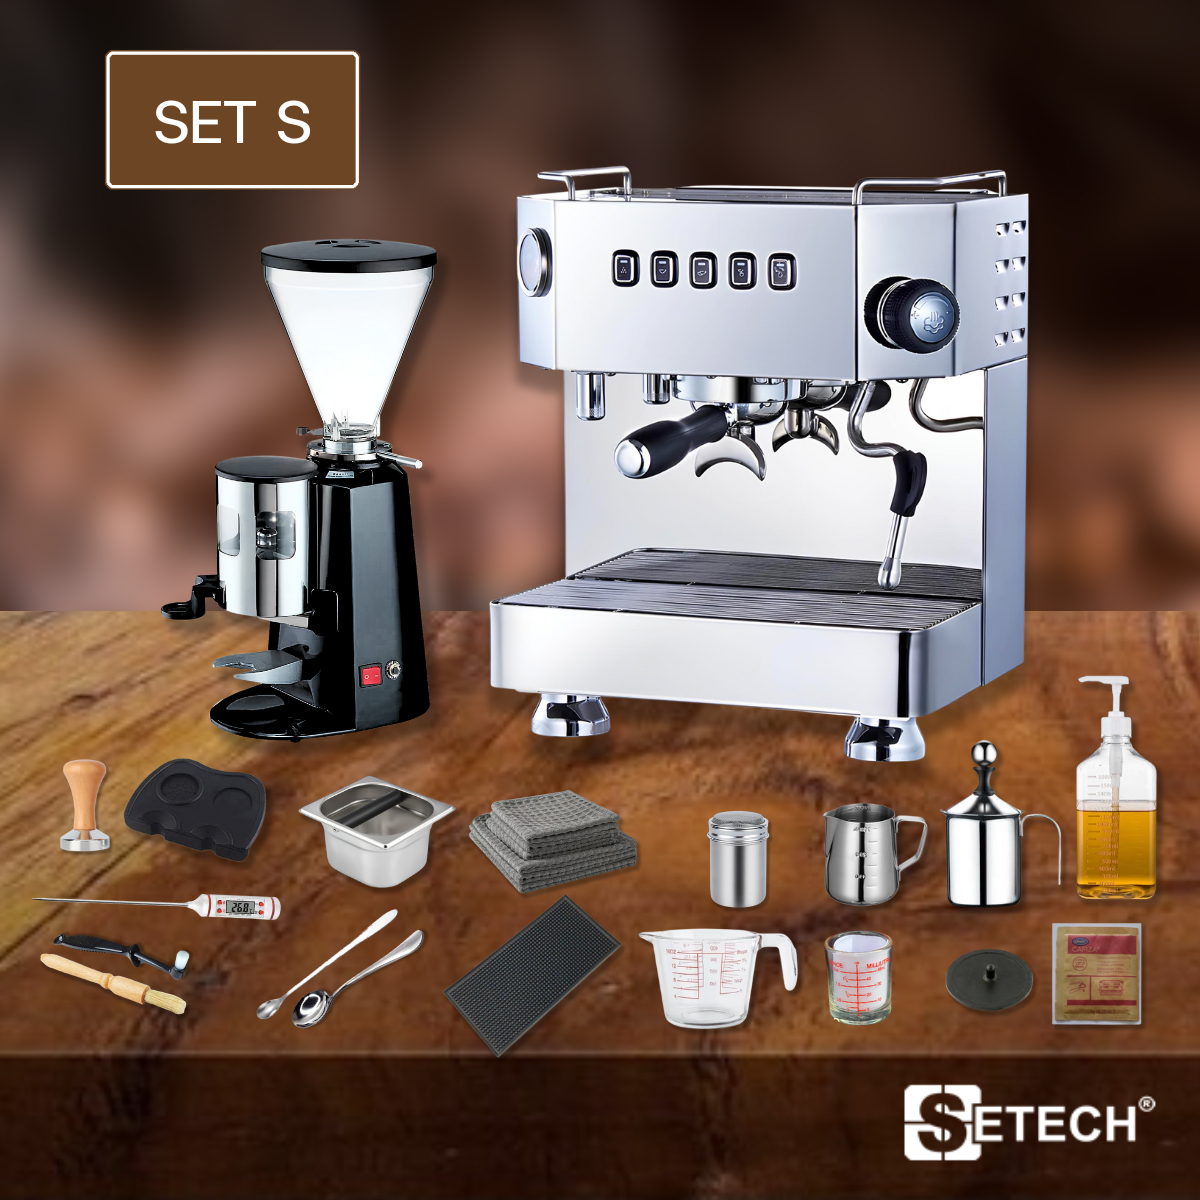 Coffee maker set for opening a shop equipment 25 items SET S SET S